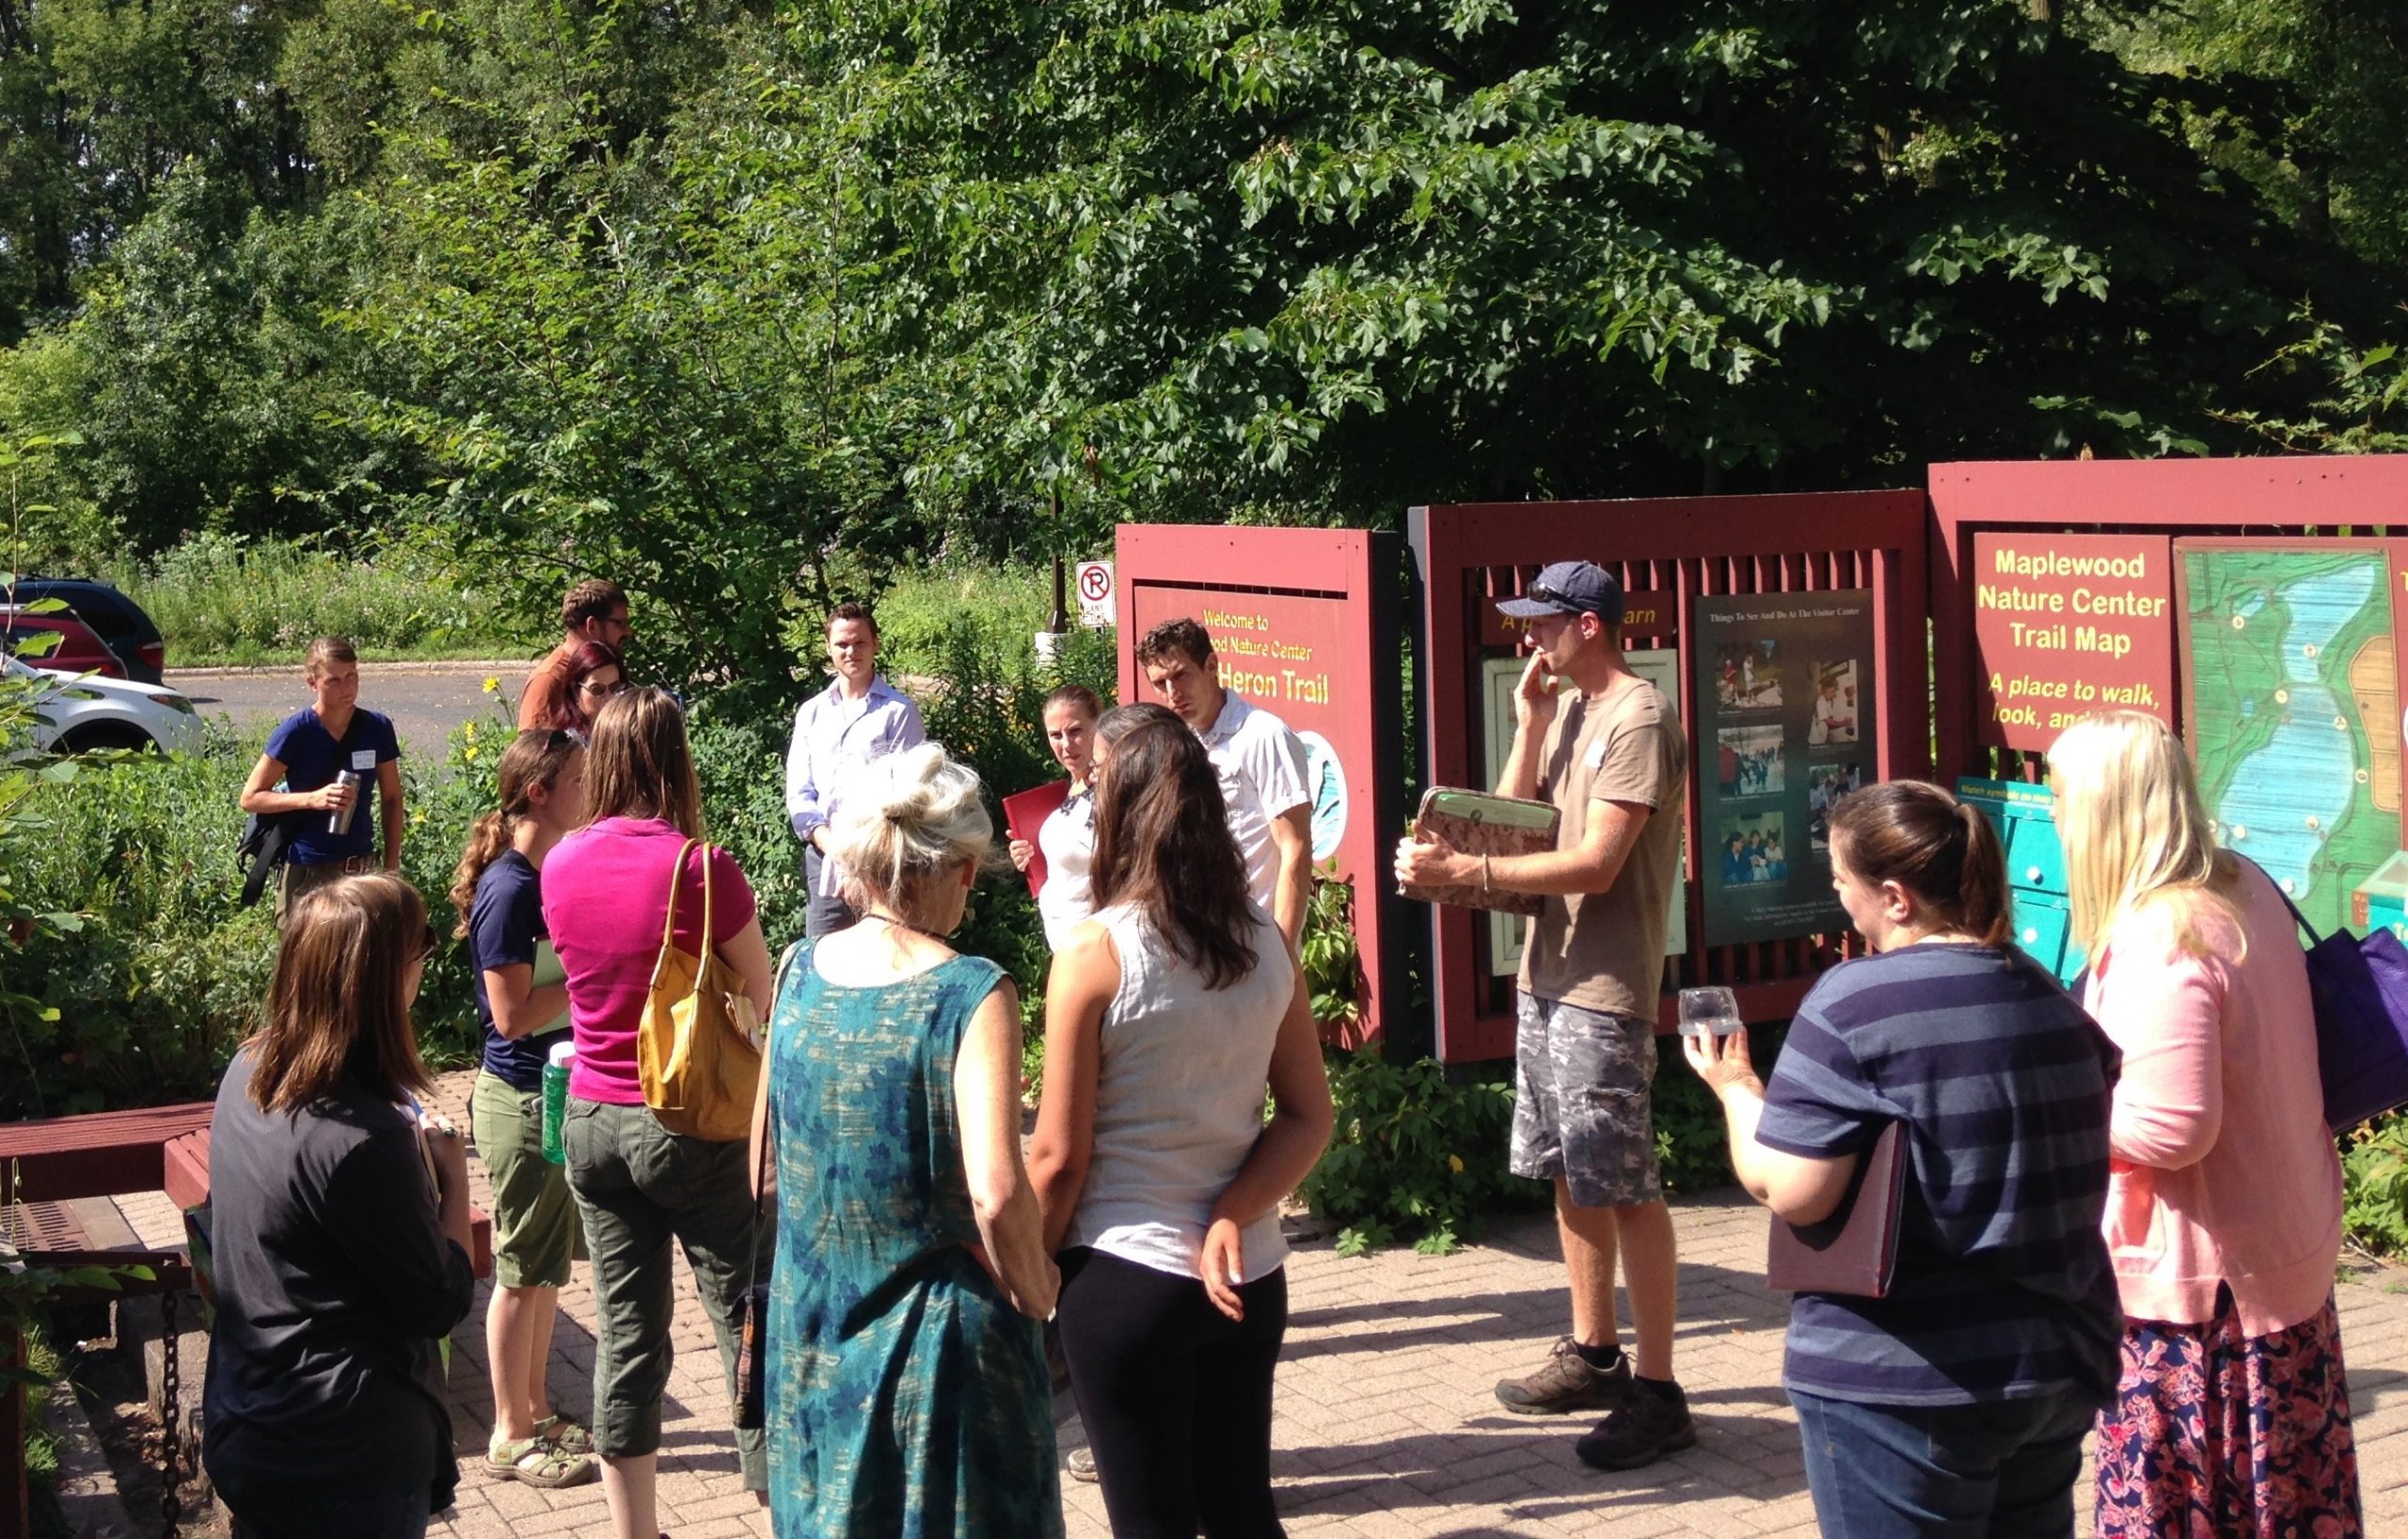 Blue Thumb partners studying native plants and pollinators at Maplewood Nature Center